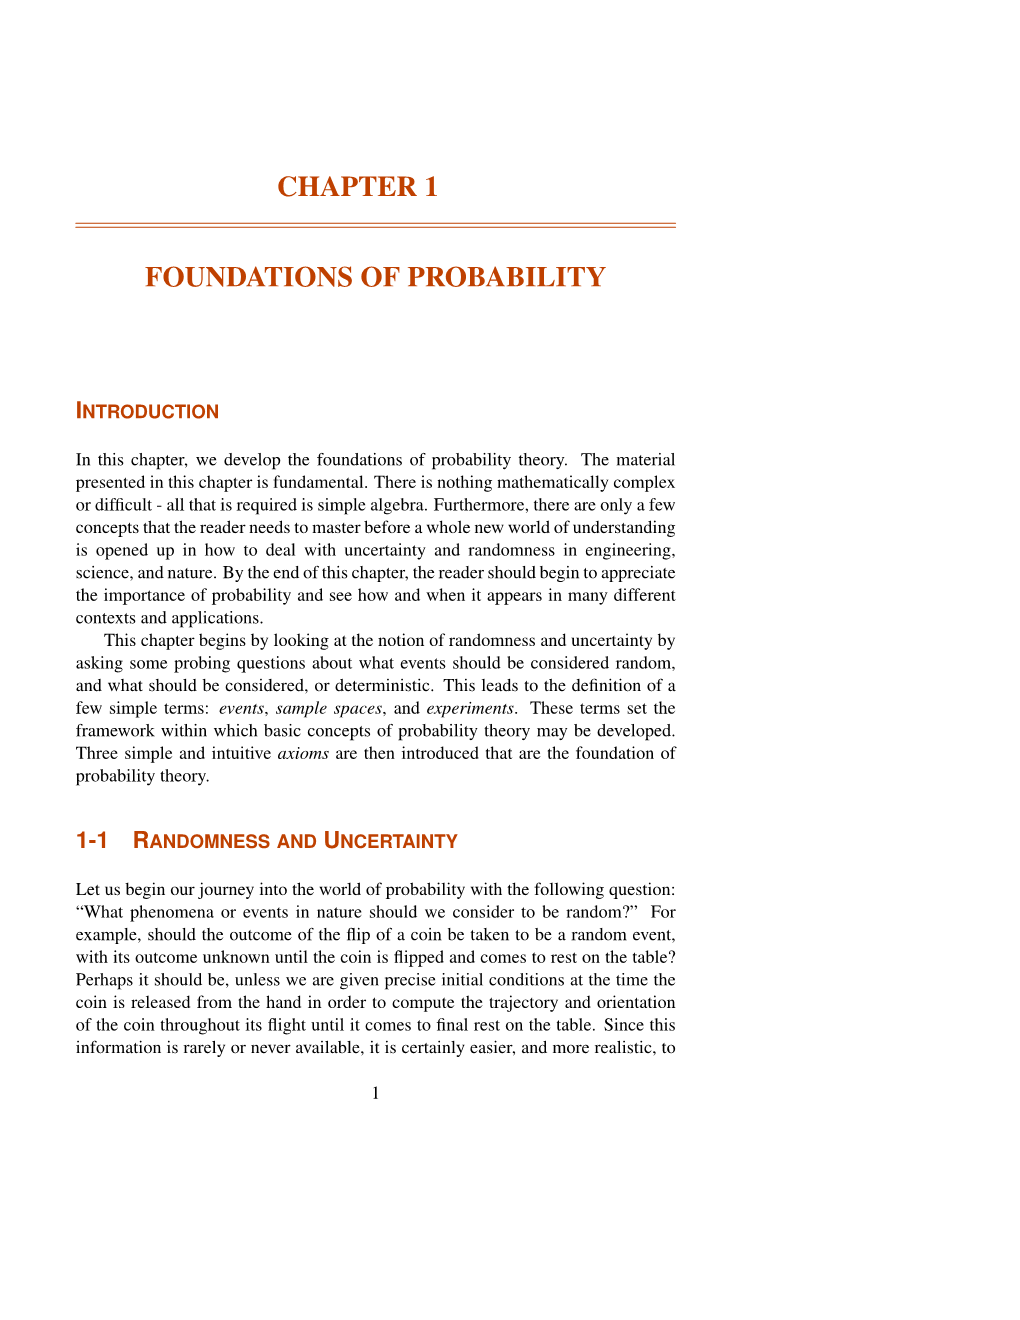 The Foundations of Probability Theory